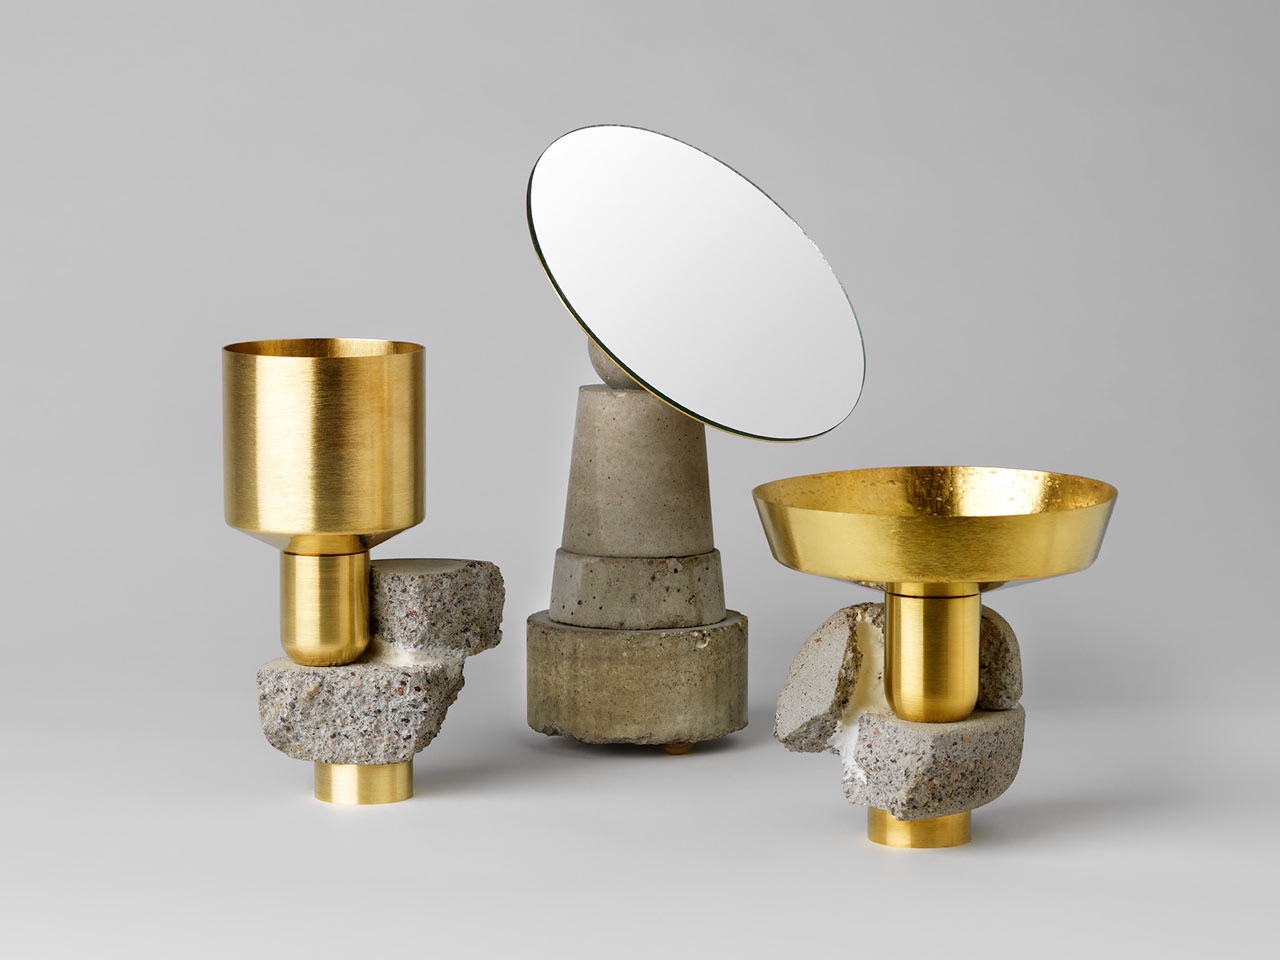 David Taylor's Considered Objects formed in concrete and brass. More #concrete on the blog.